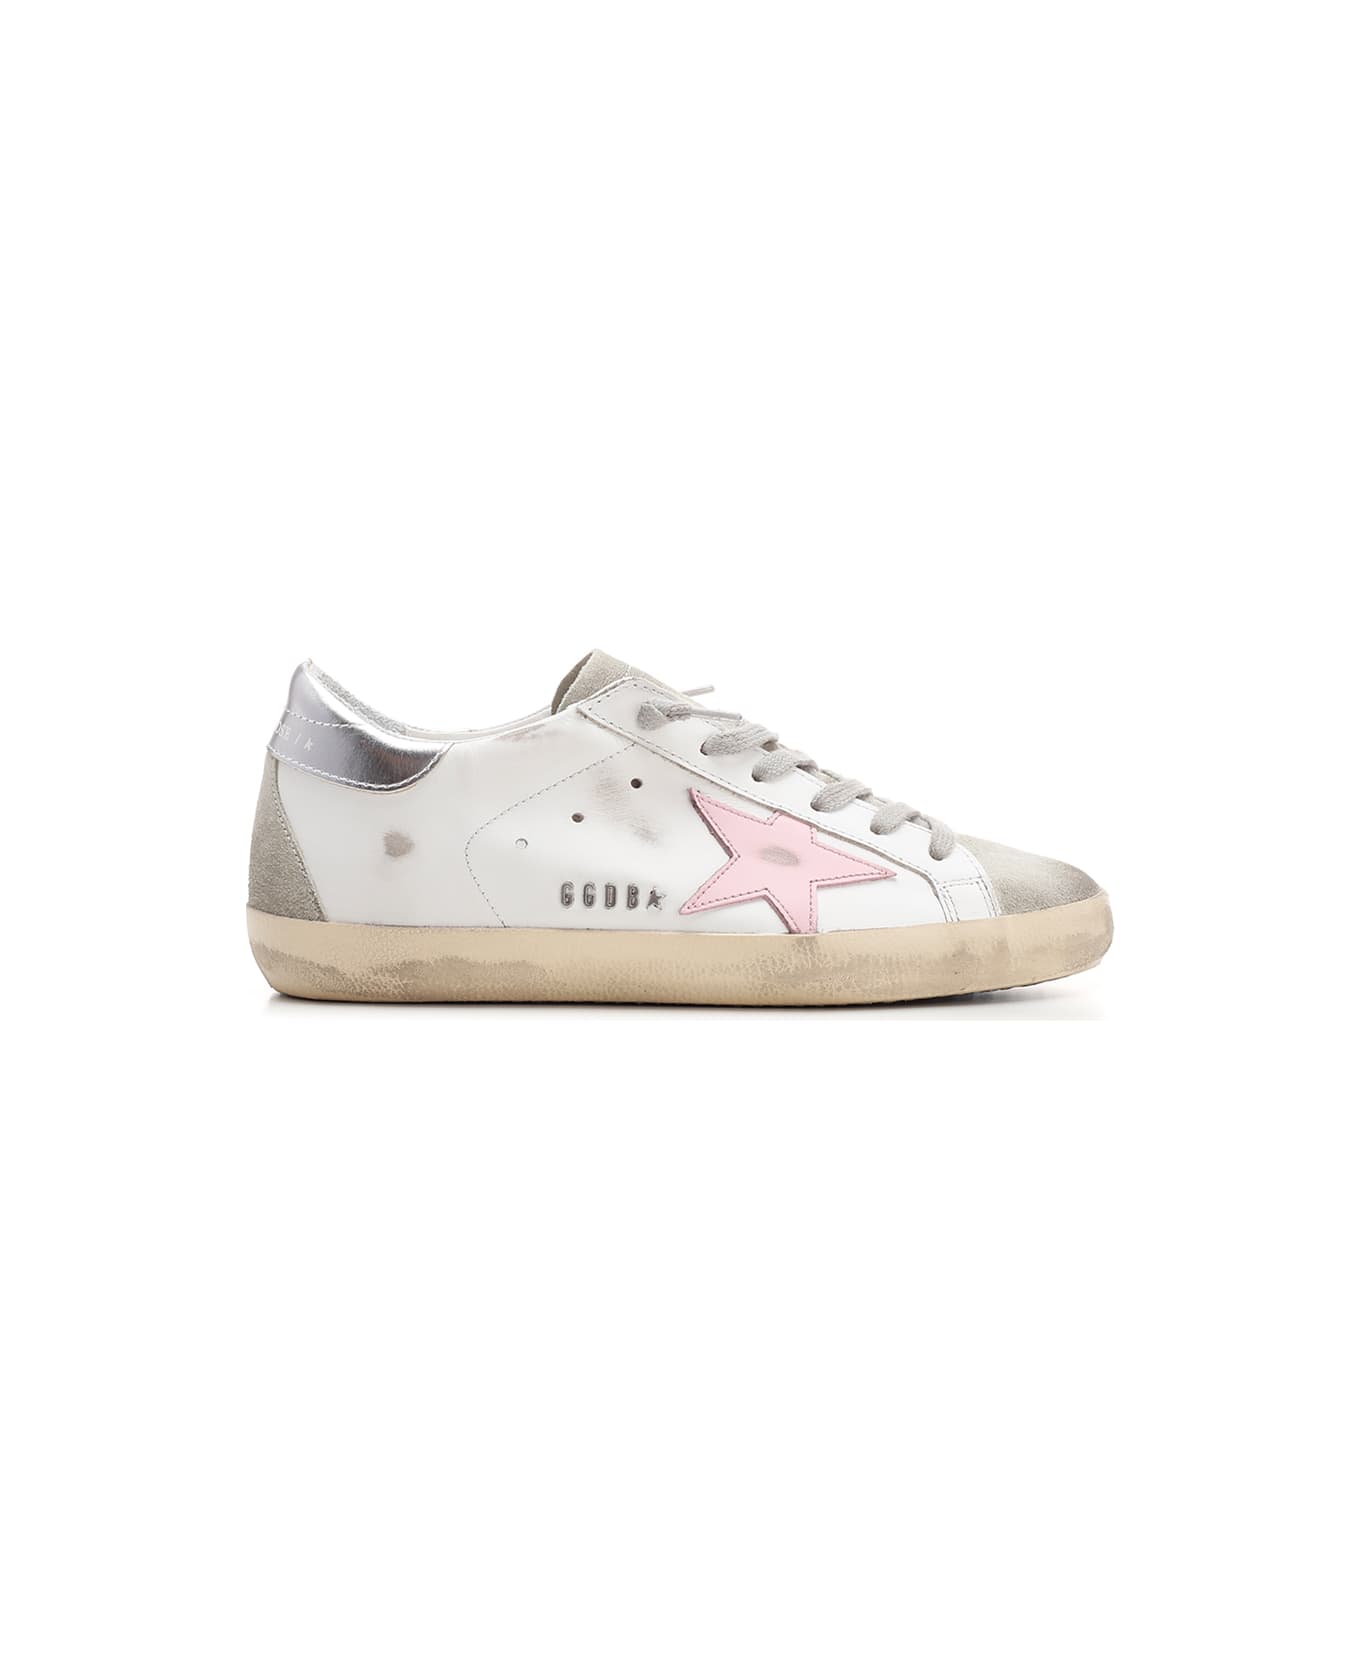 Golden Goose Super-star Leather Upper And Star Suede Toe And Spur Laminated Heel Metal Lettering - White/Ice/Orchid Pink/Silver